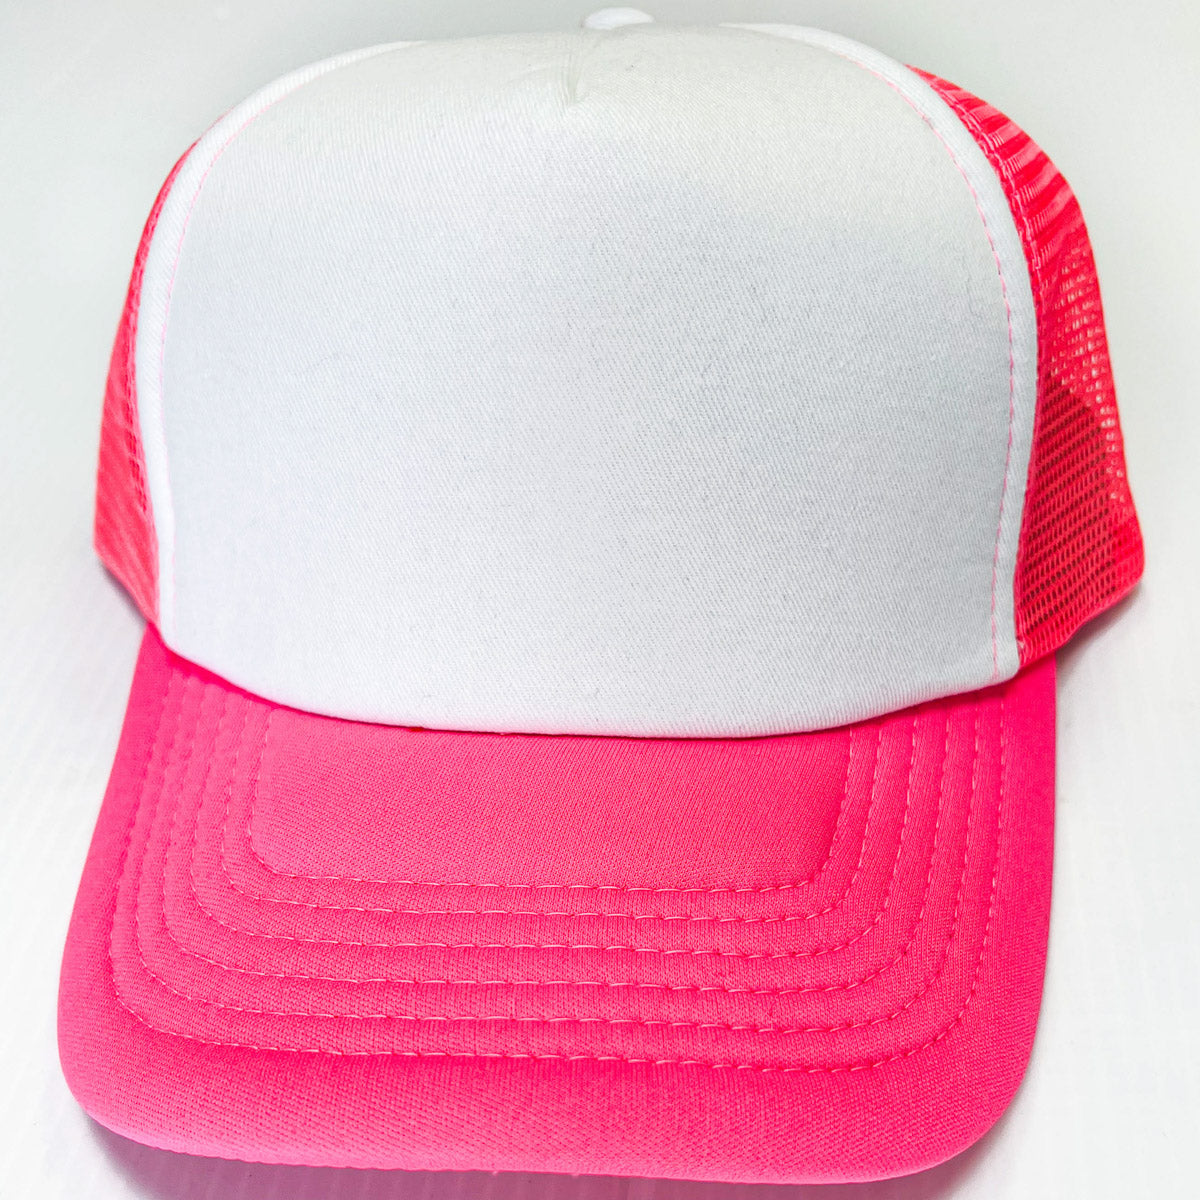 Bright Pink and White Trucker Cap